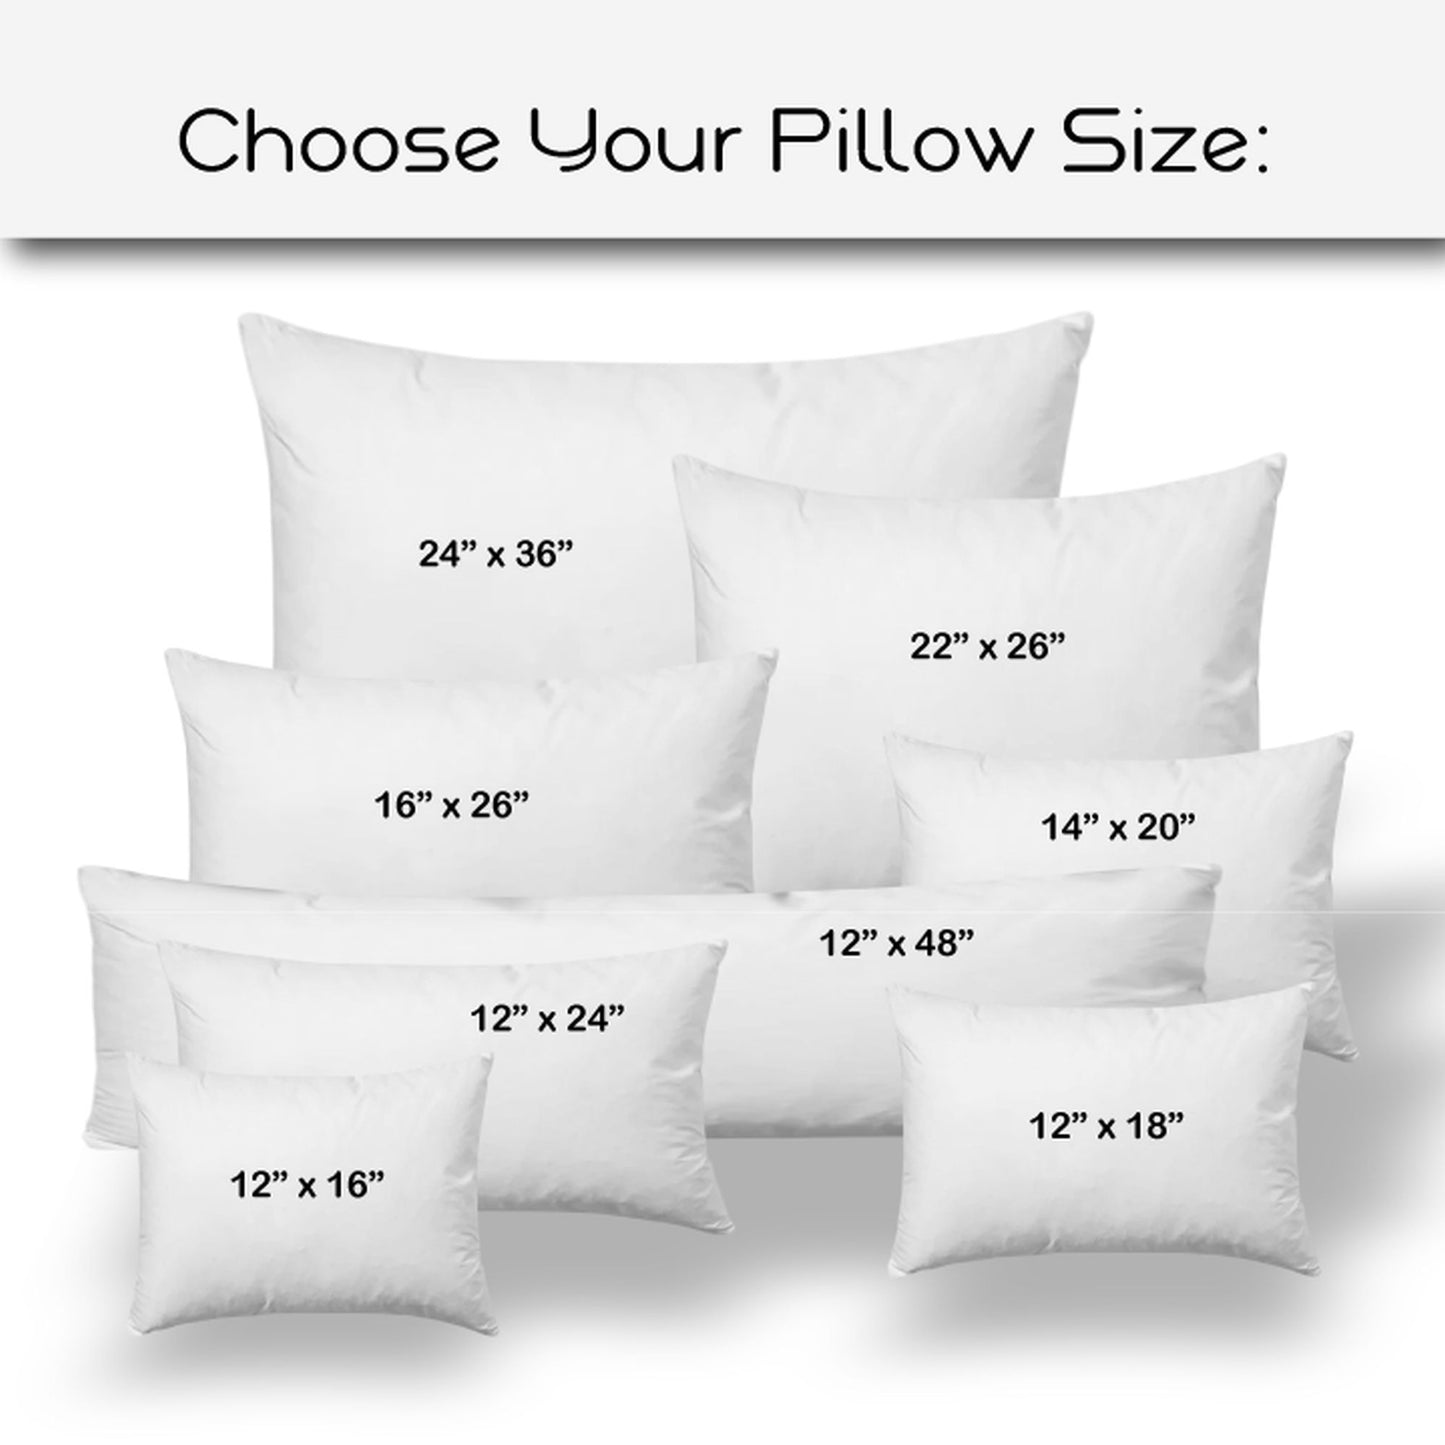 SANDY Indoor/Outdoor Soft Royal Pillow, Envelope Cover Only, 12x24